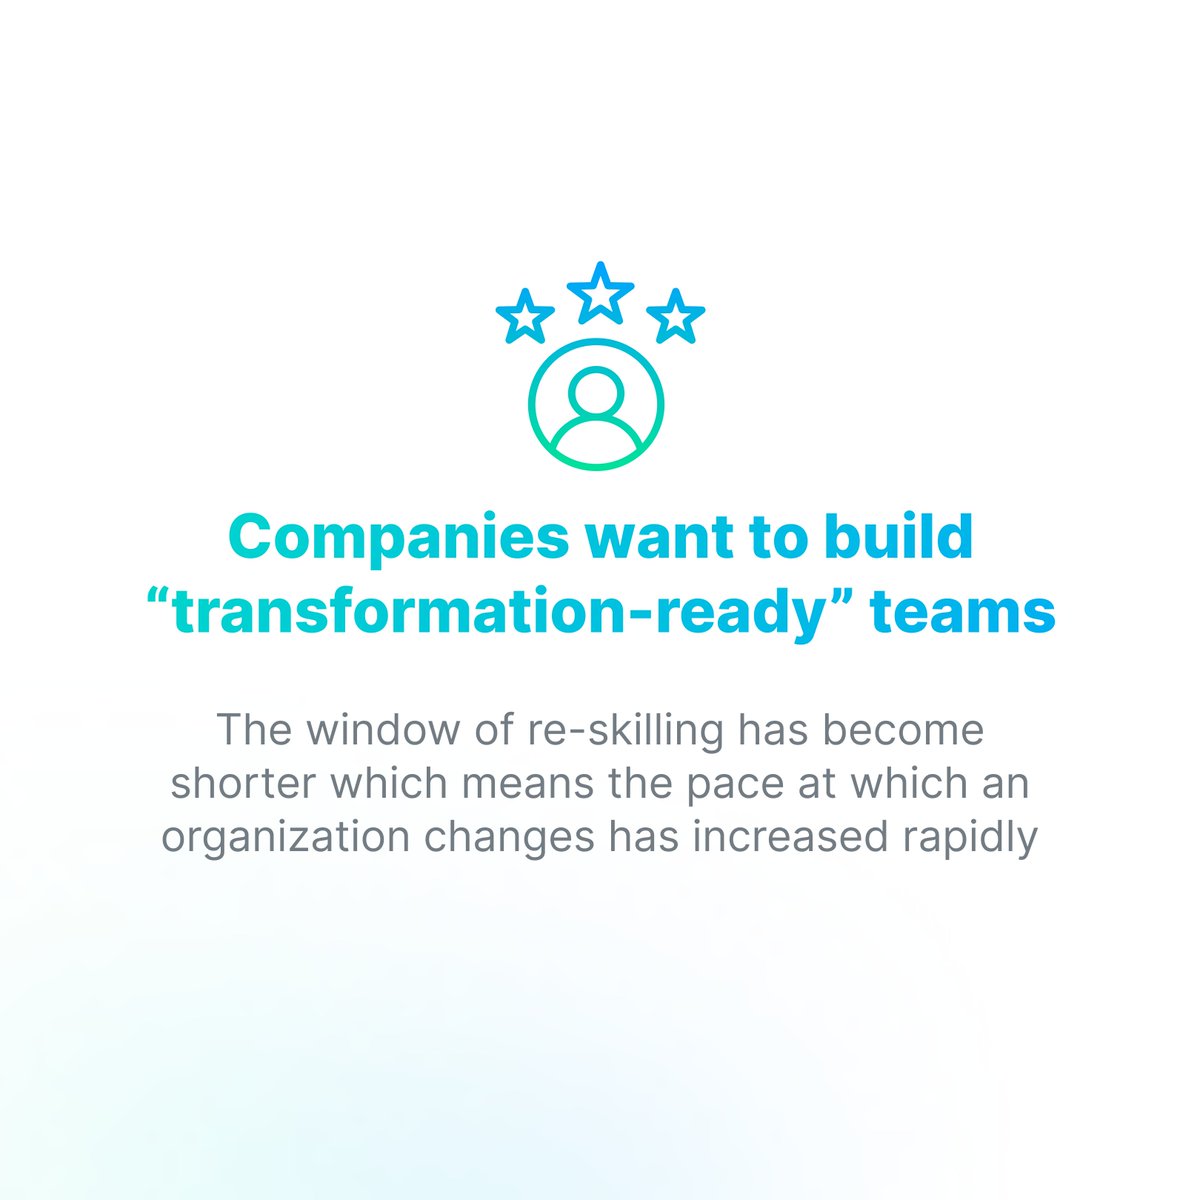 The role of L&D leaders is becoming increasingly critical to how an organization survives the #futureofwork. They will dictate the pace at which companies grow in the near future. Here are some takeaways from the latest #SkillFlex blog. #digitaltransformation #upskilling